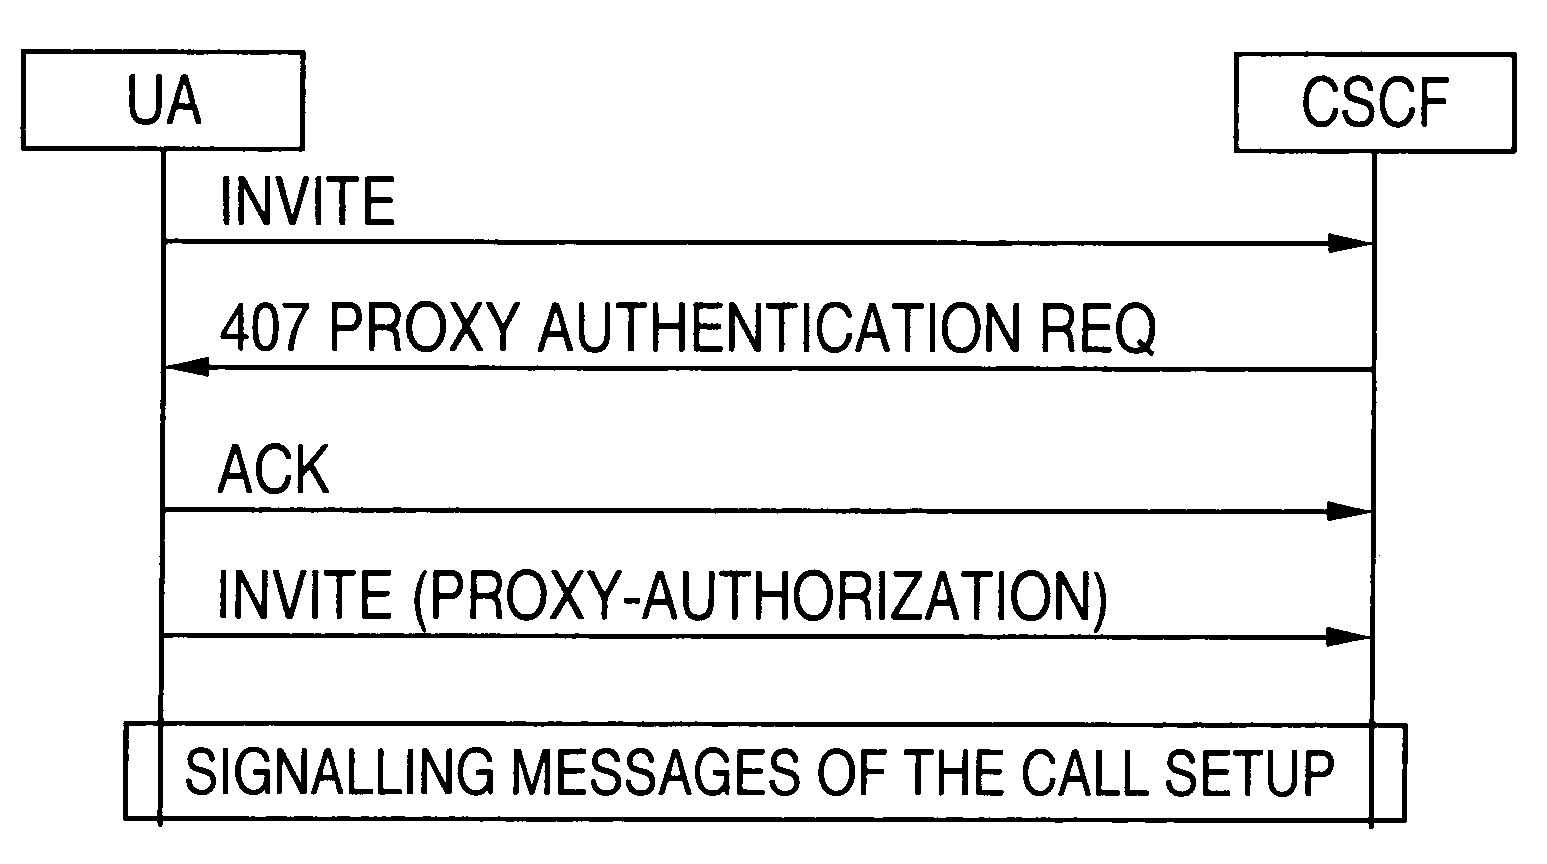 Techniques for performing UMTS (universal mobile telecommunications system) authentication using SIP (session initiation protocol) messages